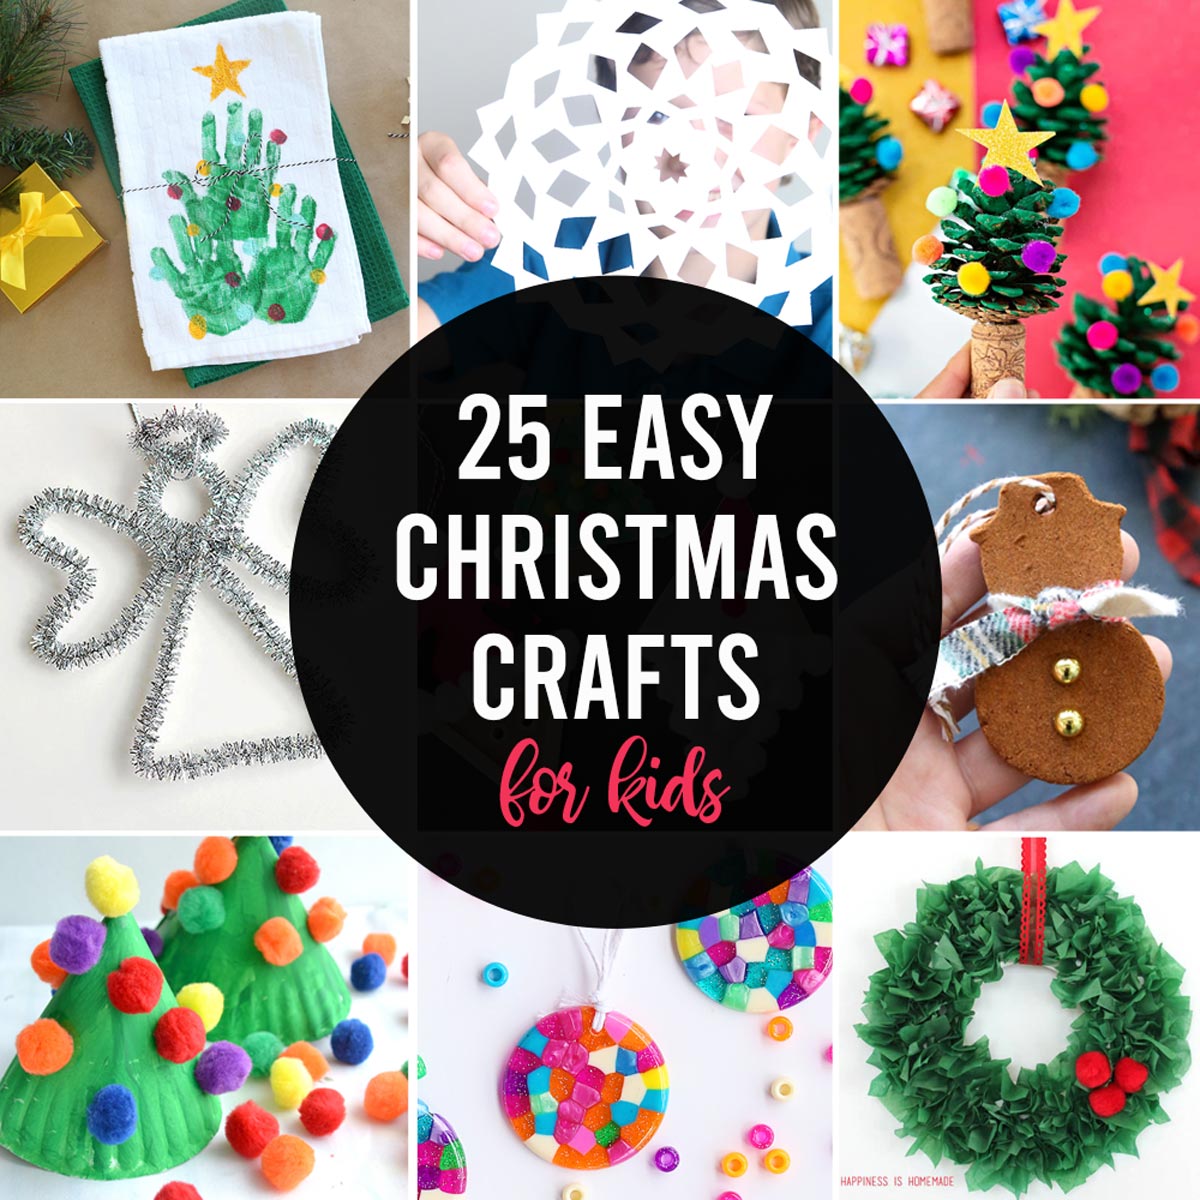 25 Easy Christmas Crafts for Kids to Make